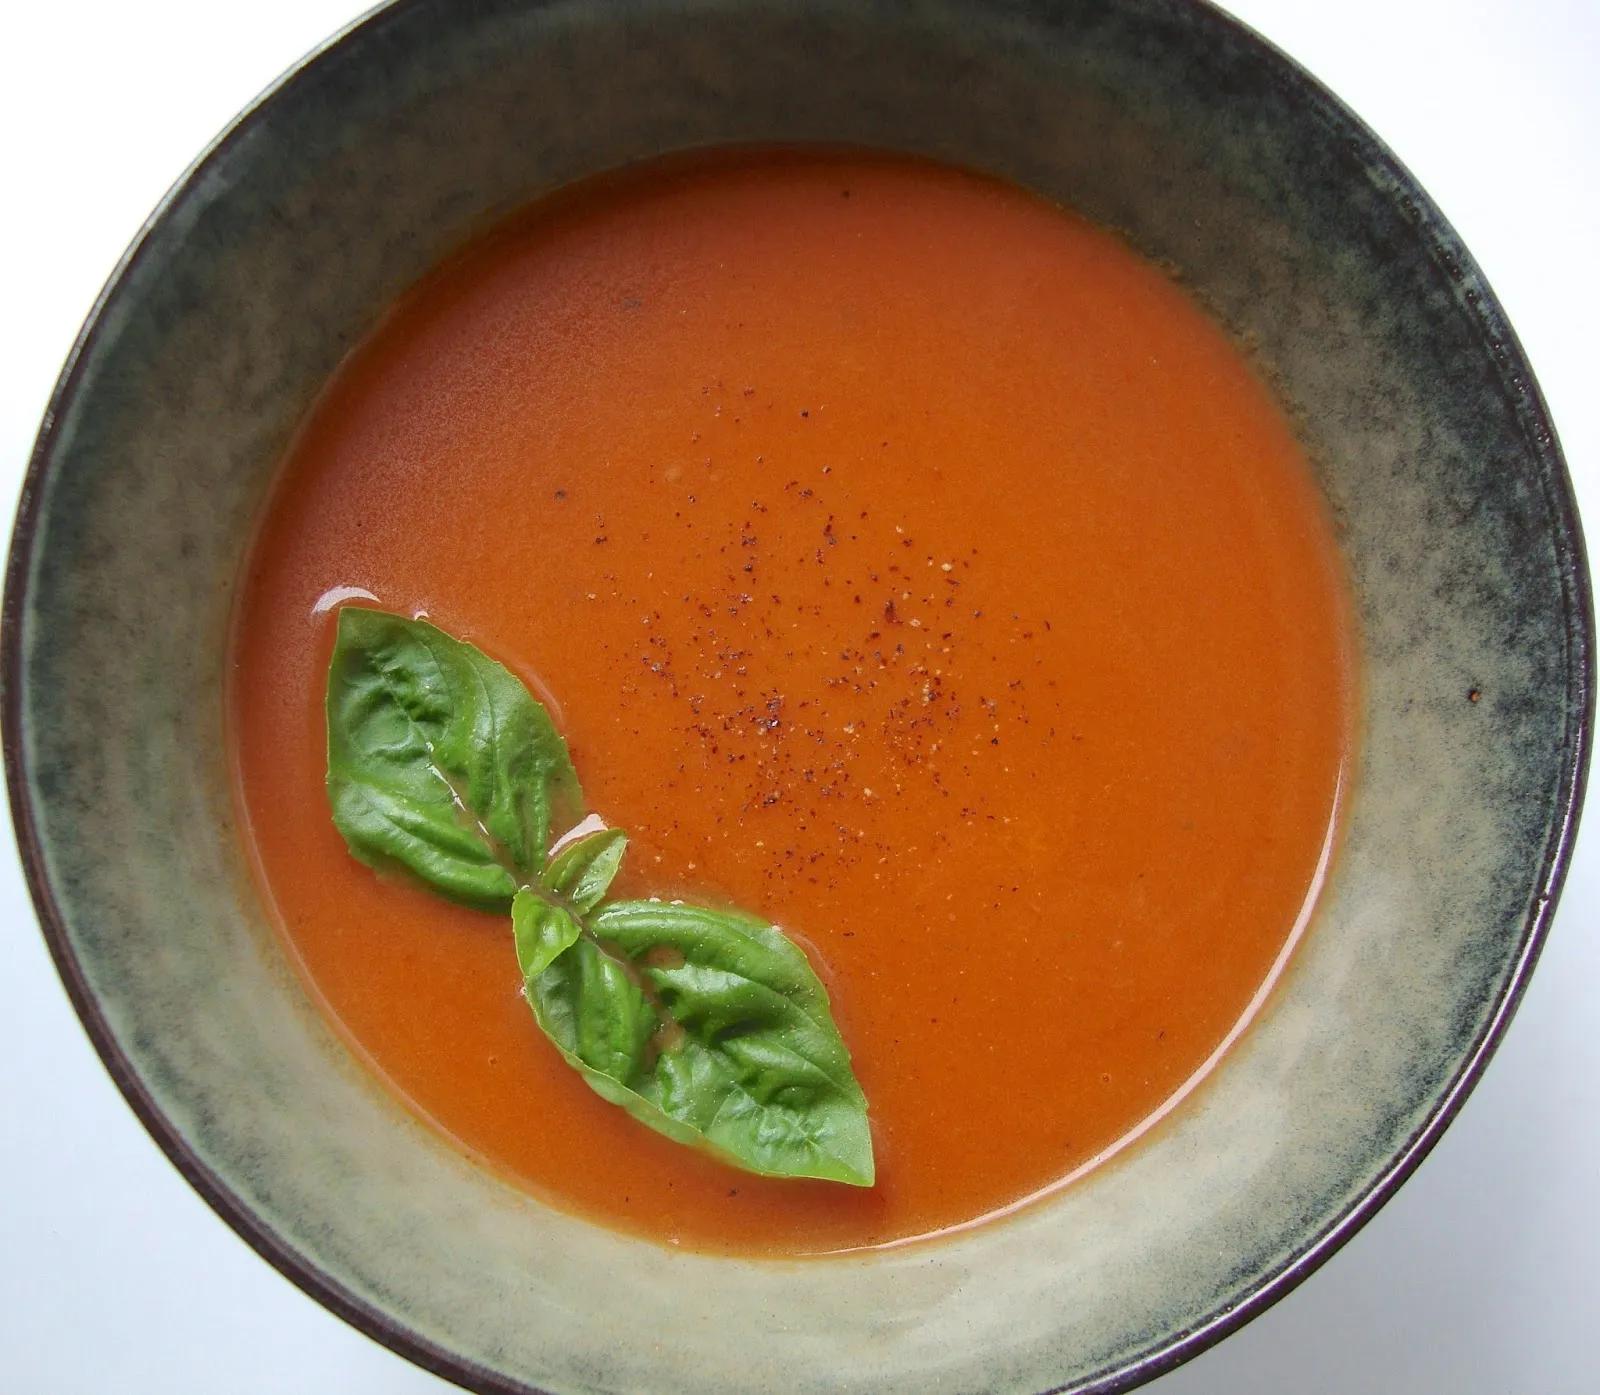 Cooketteria: Jamaica is calling: Tomatensuppe mit Piment